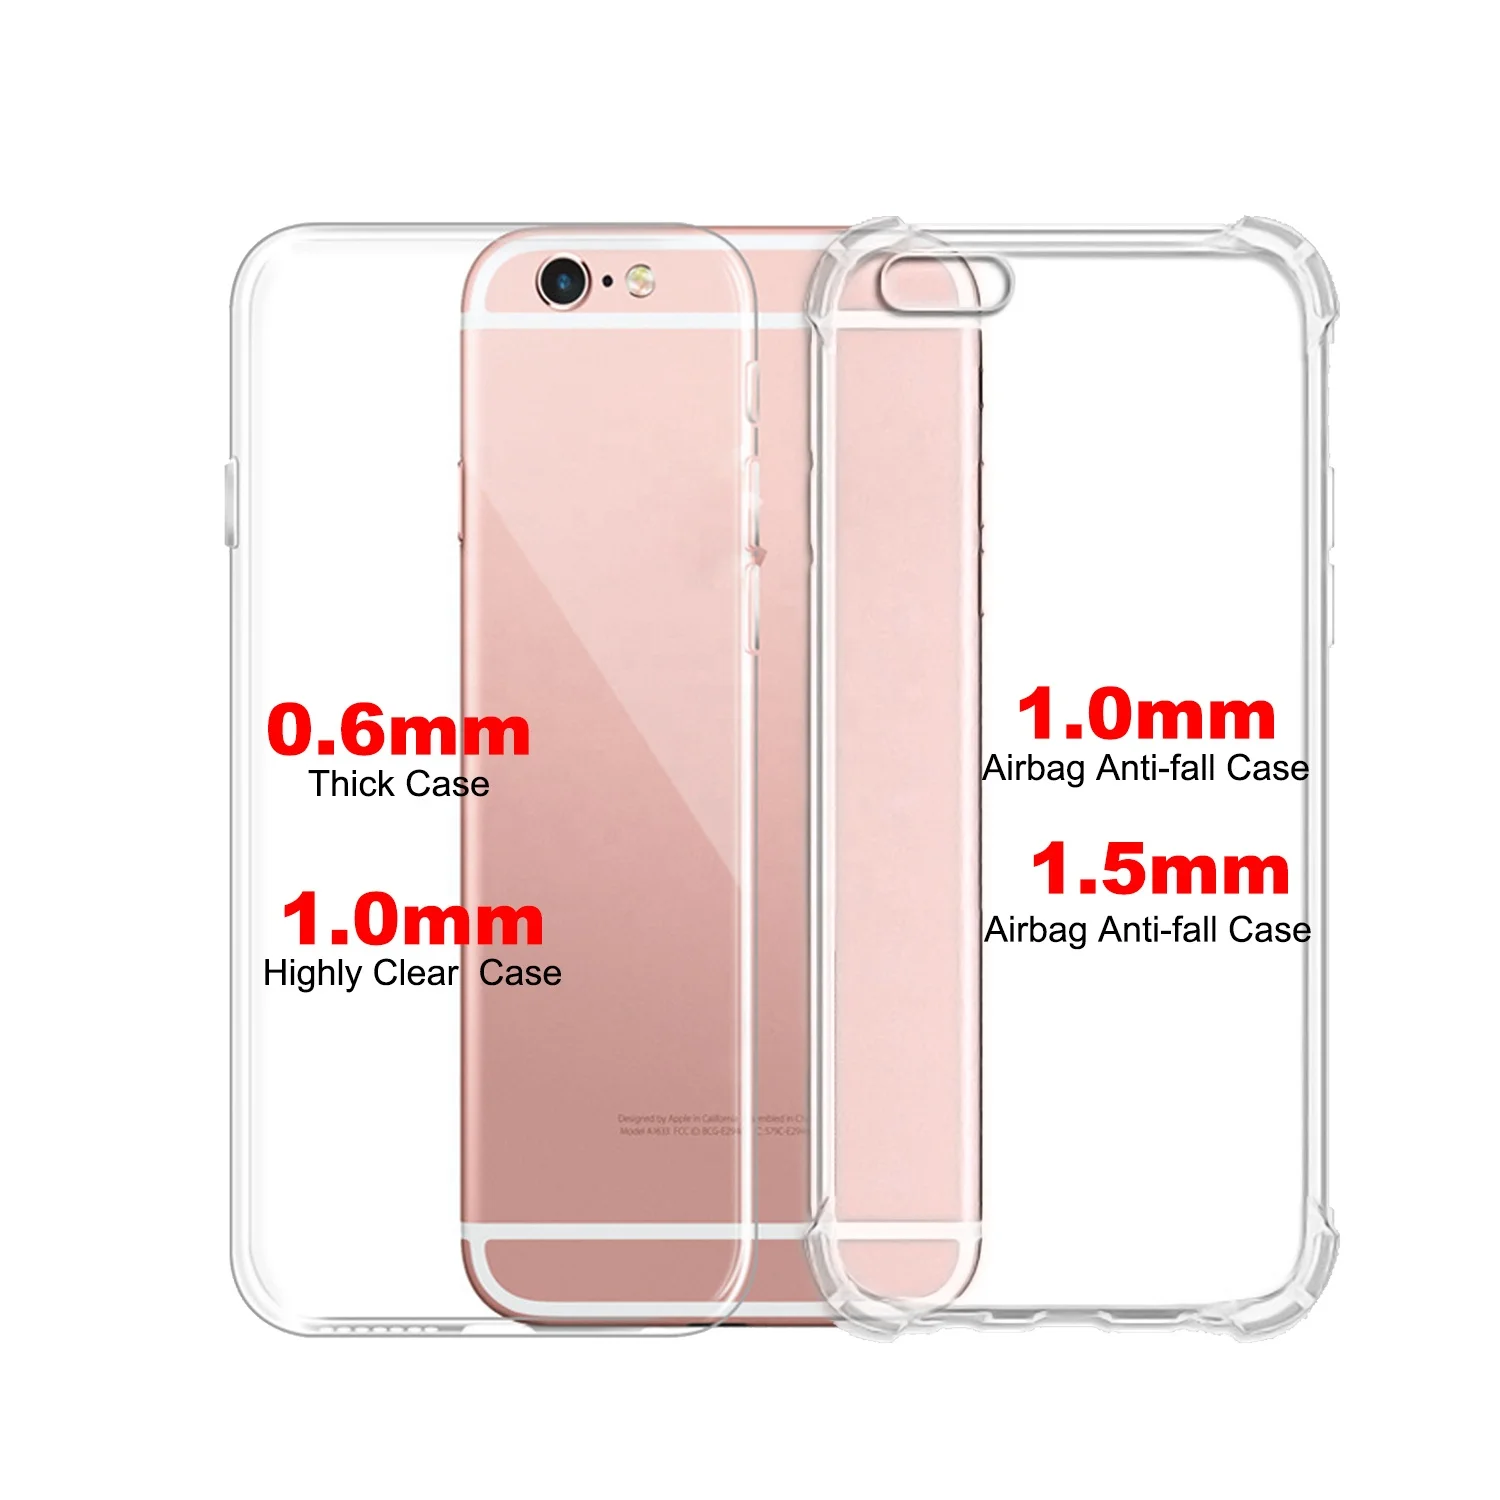 

IVANHOE Airbag Protection Case For iPhone 12 11 Pro XS Max X Four Corner Anti-fall Silicone Clear Cover For iPhone XR 7 8 Plus